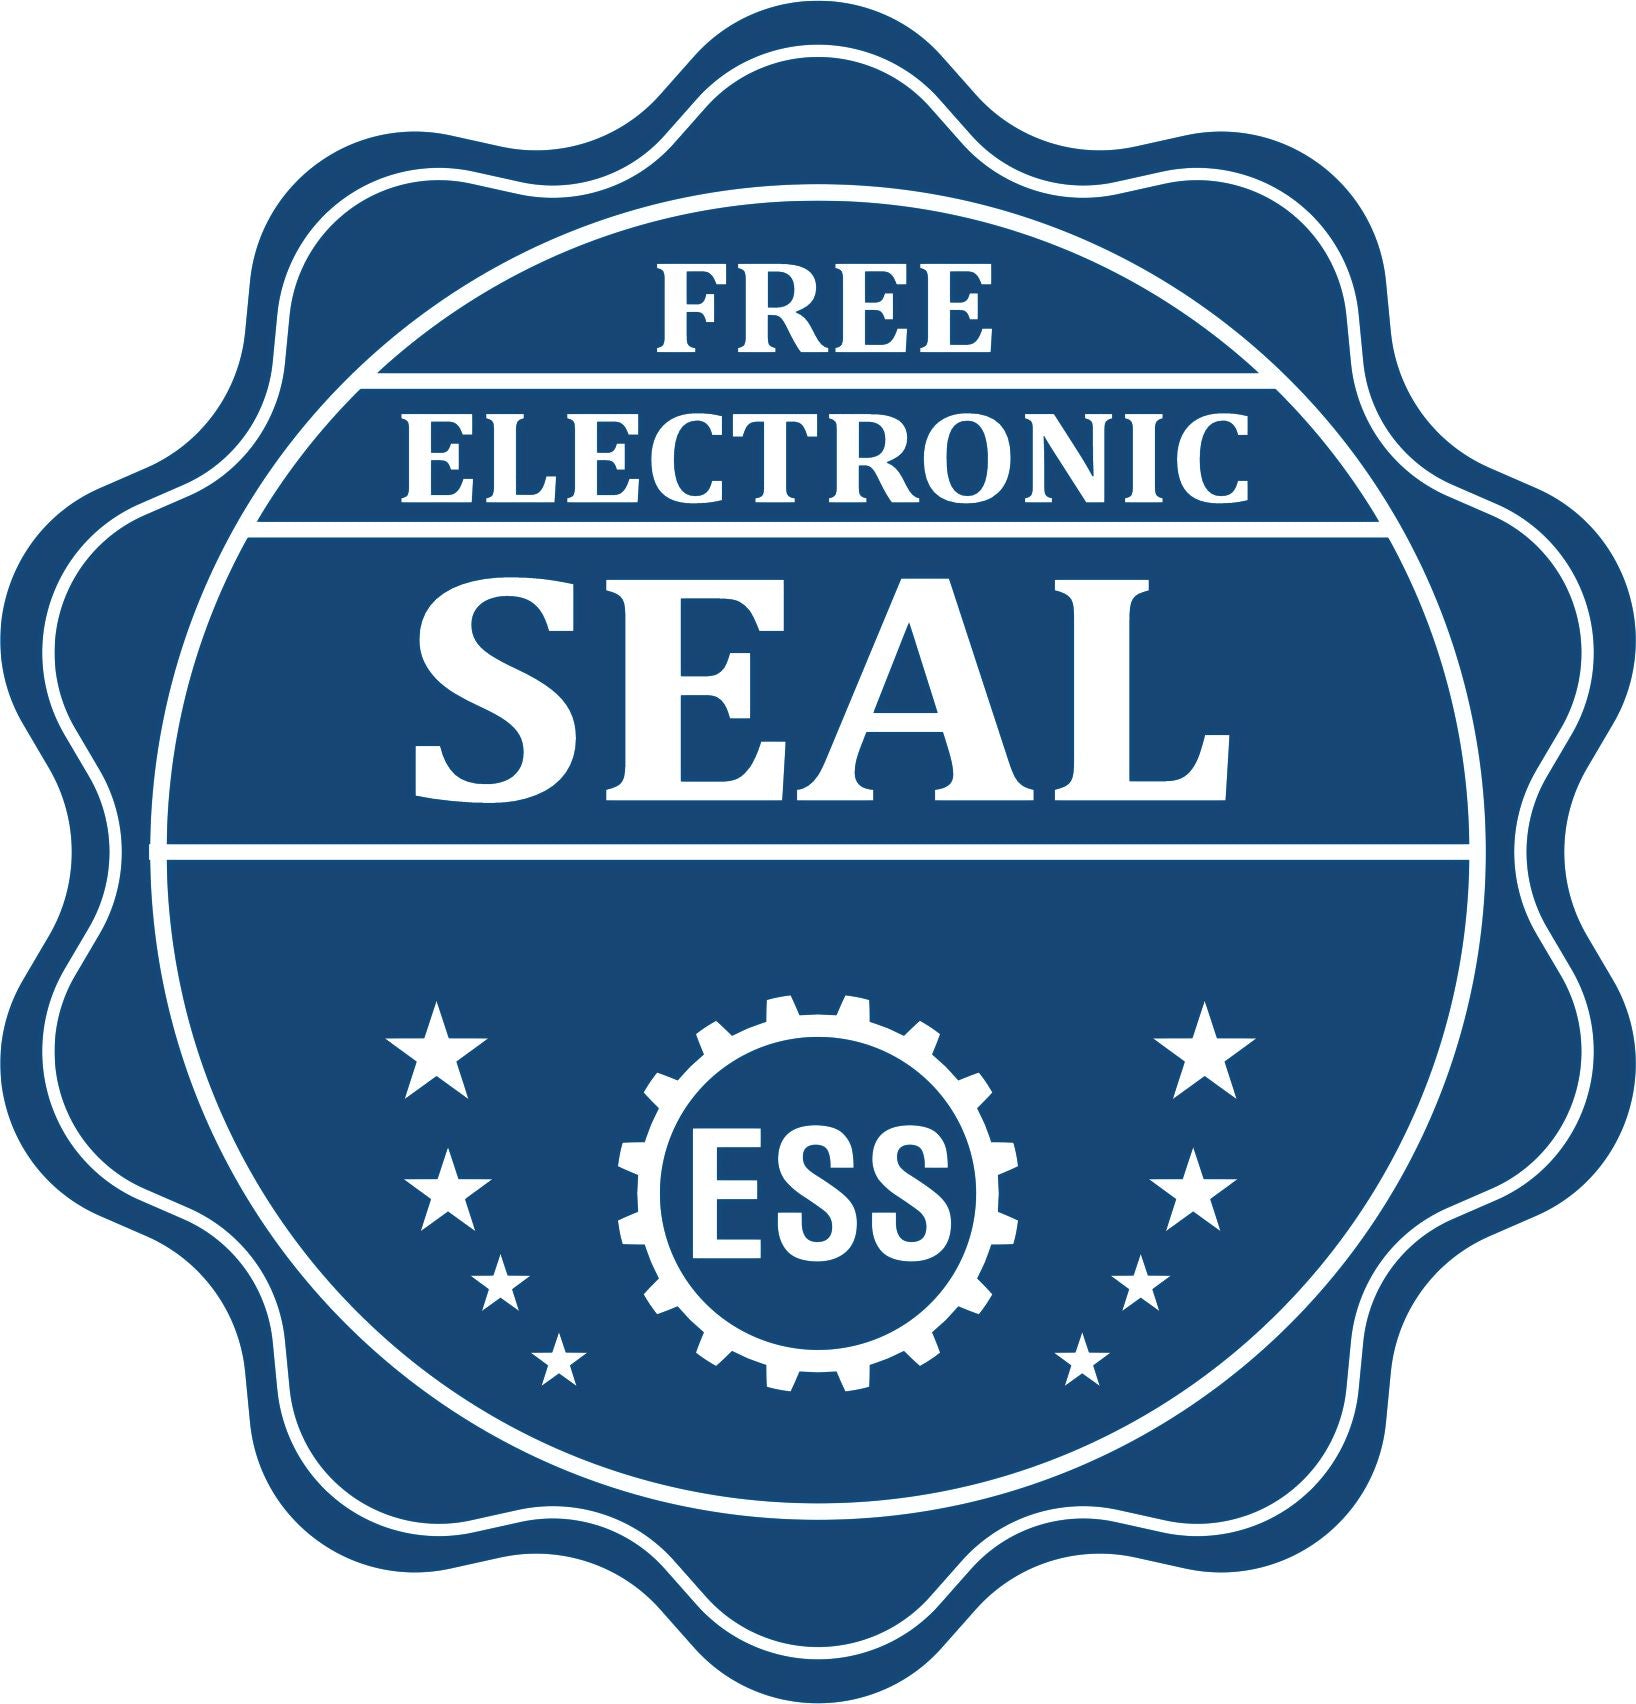 A badge showing a free electronic seal for the Gift Indiana Geologist Seal with stars and the ESS gear on the emblem.